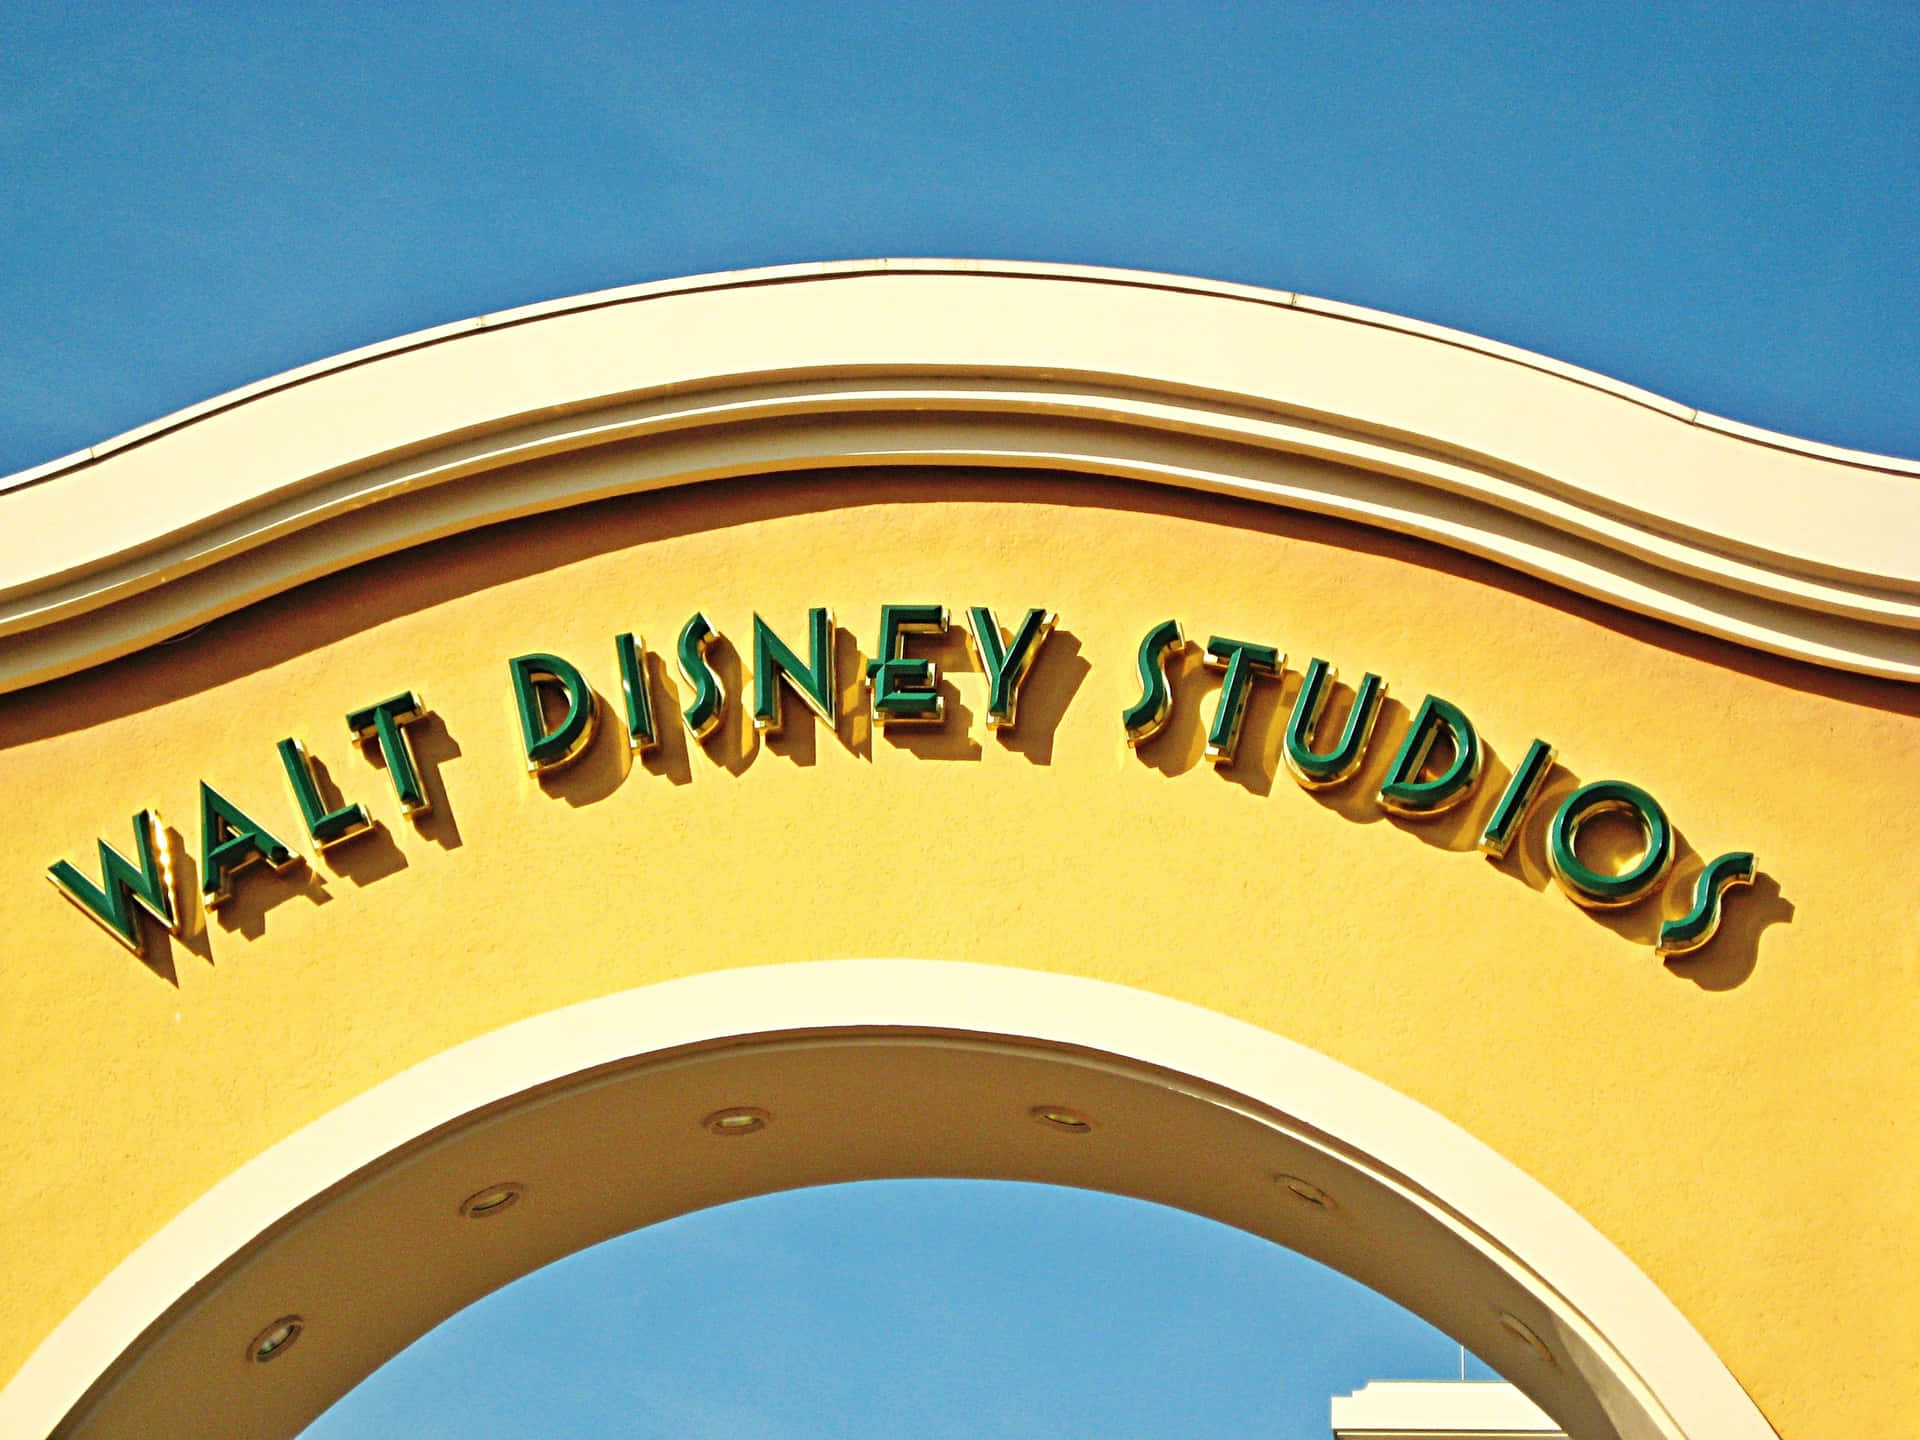 Take a journey to the movies with Walt Disney Studios Motion Pictures